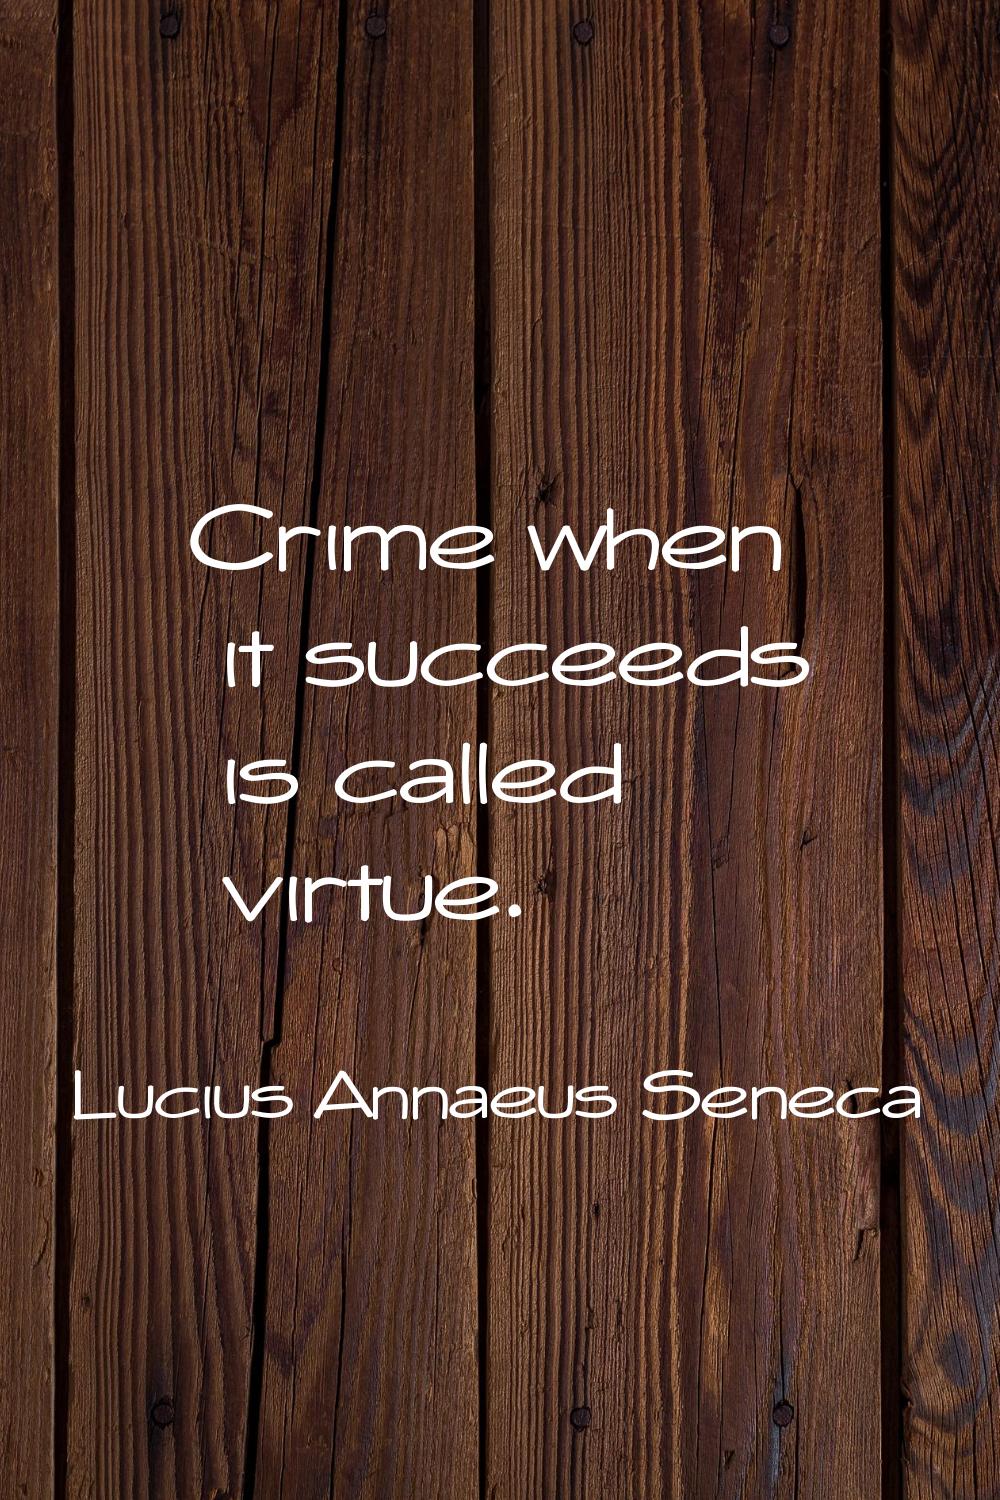 Crime when it succeeds is called virtue.